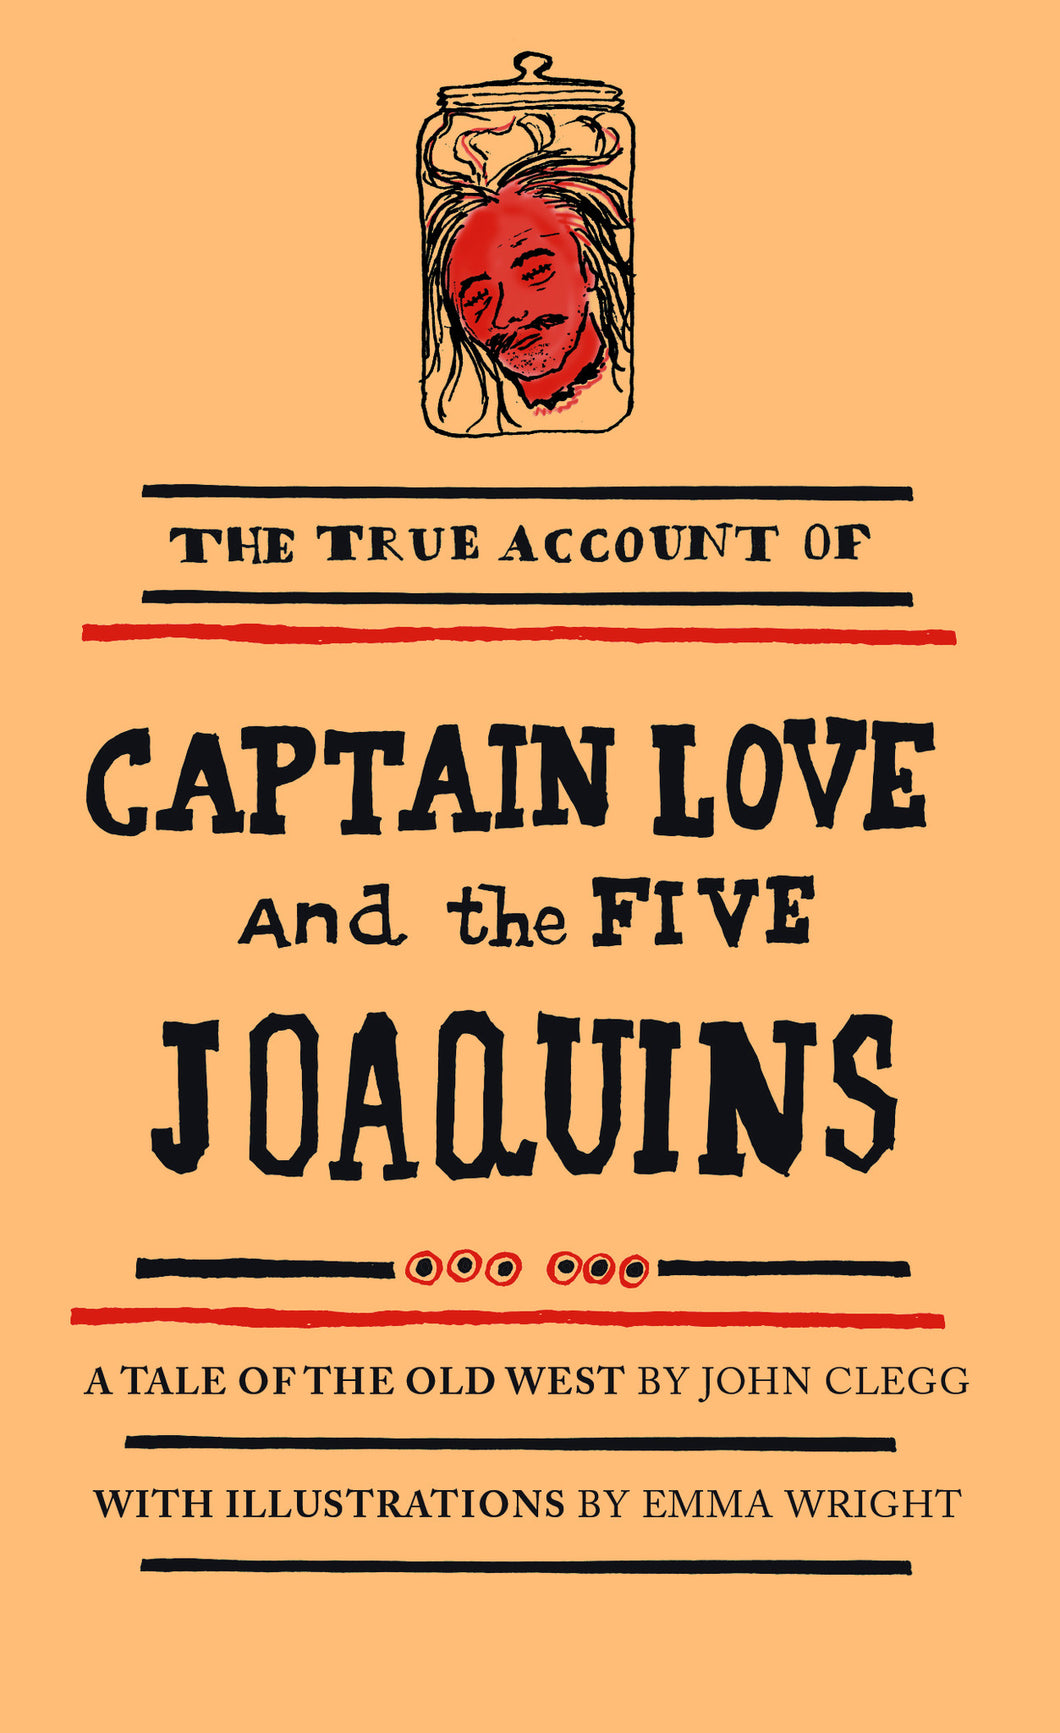 Captain Love and the Five Joaquins